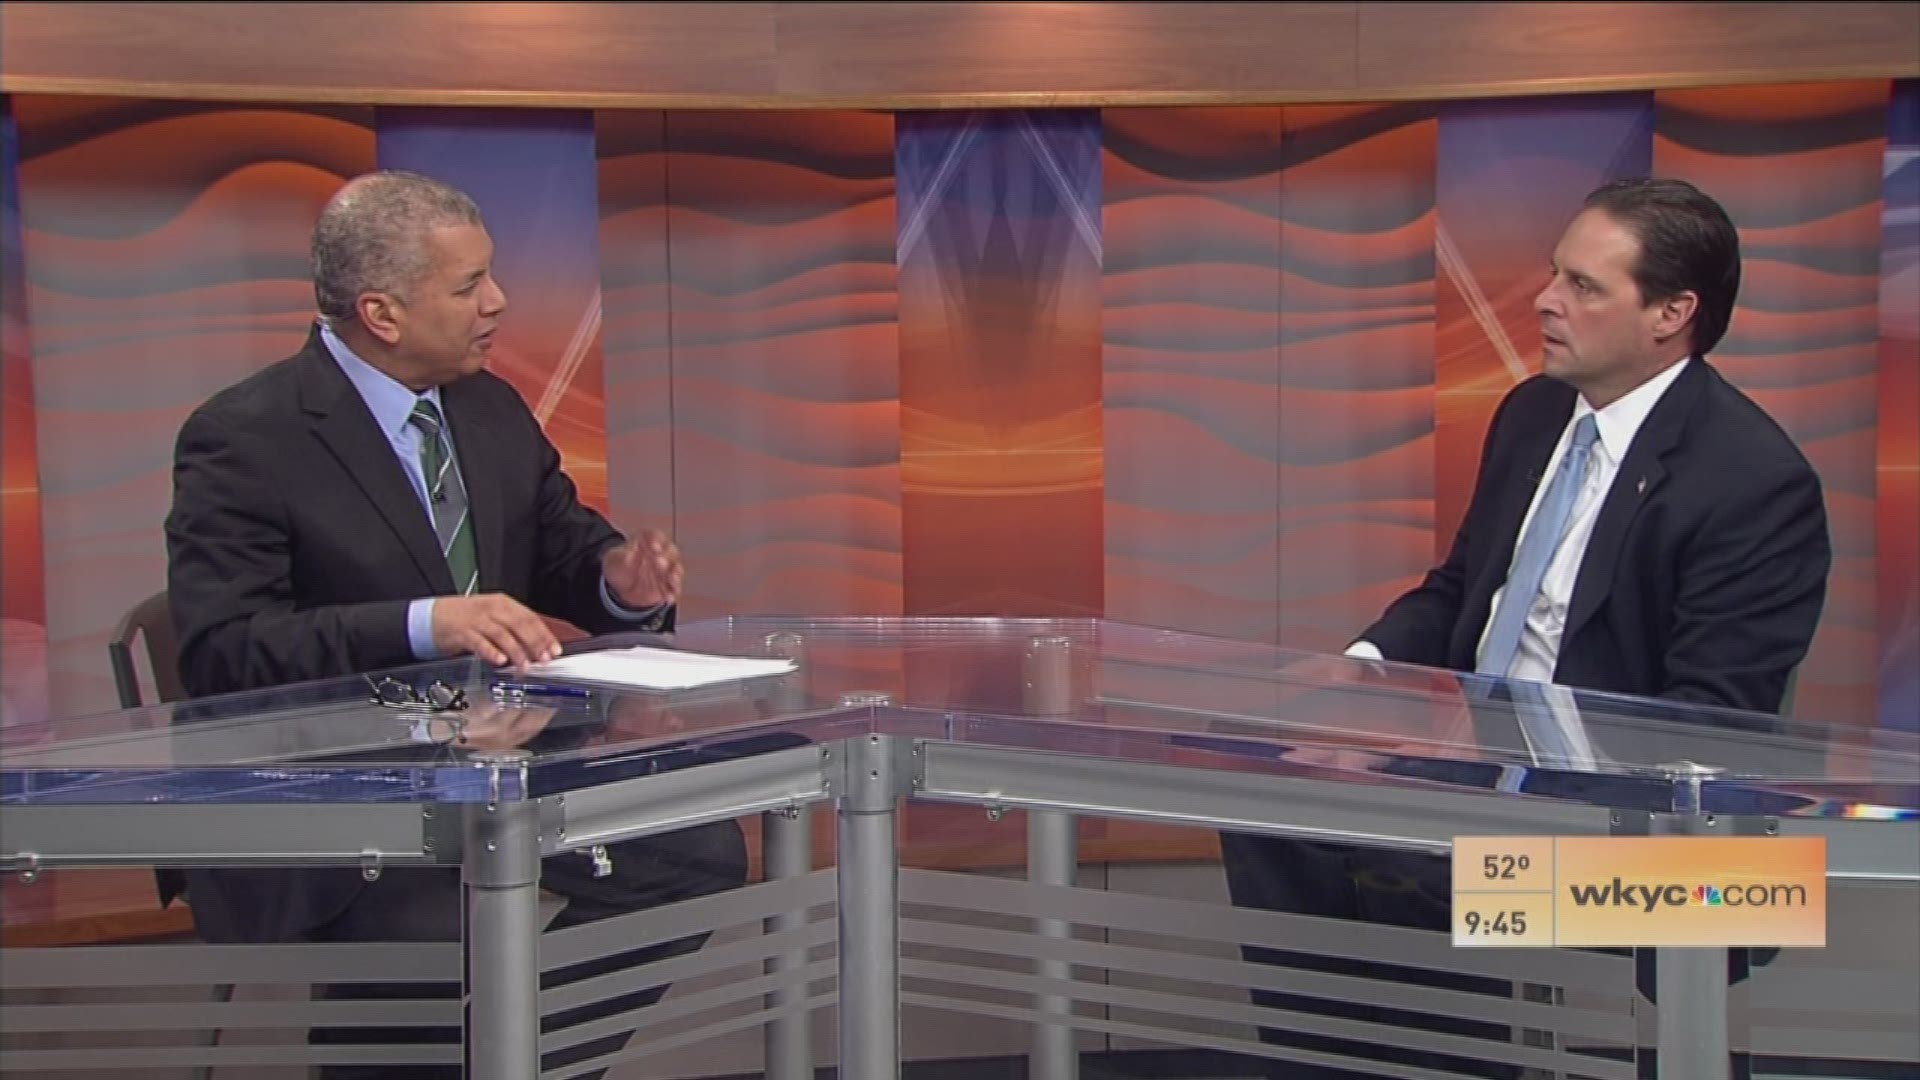 WKYC's Russ Mitchell sits down with U.S. Marshal Peter Elliott in this week's segment.